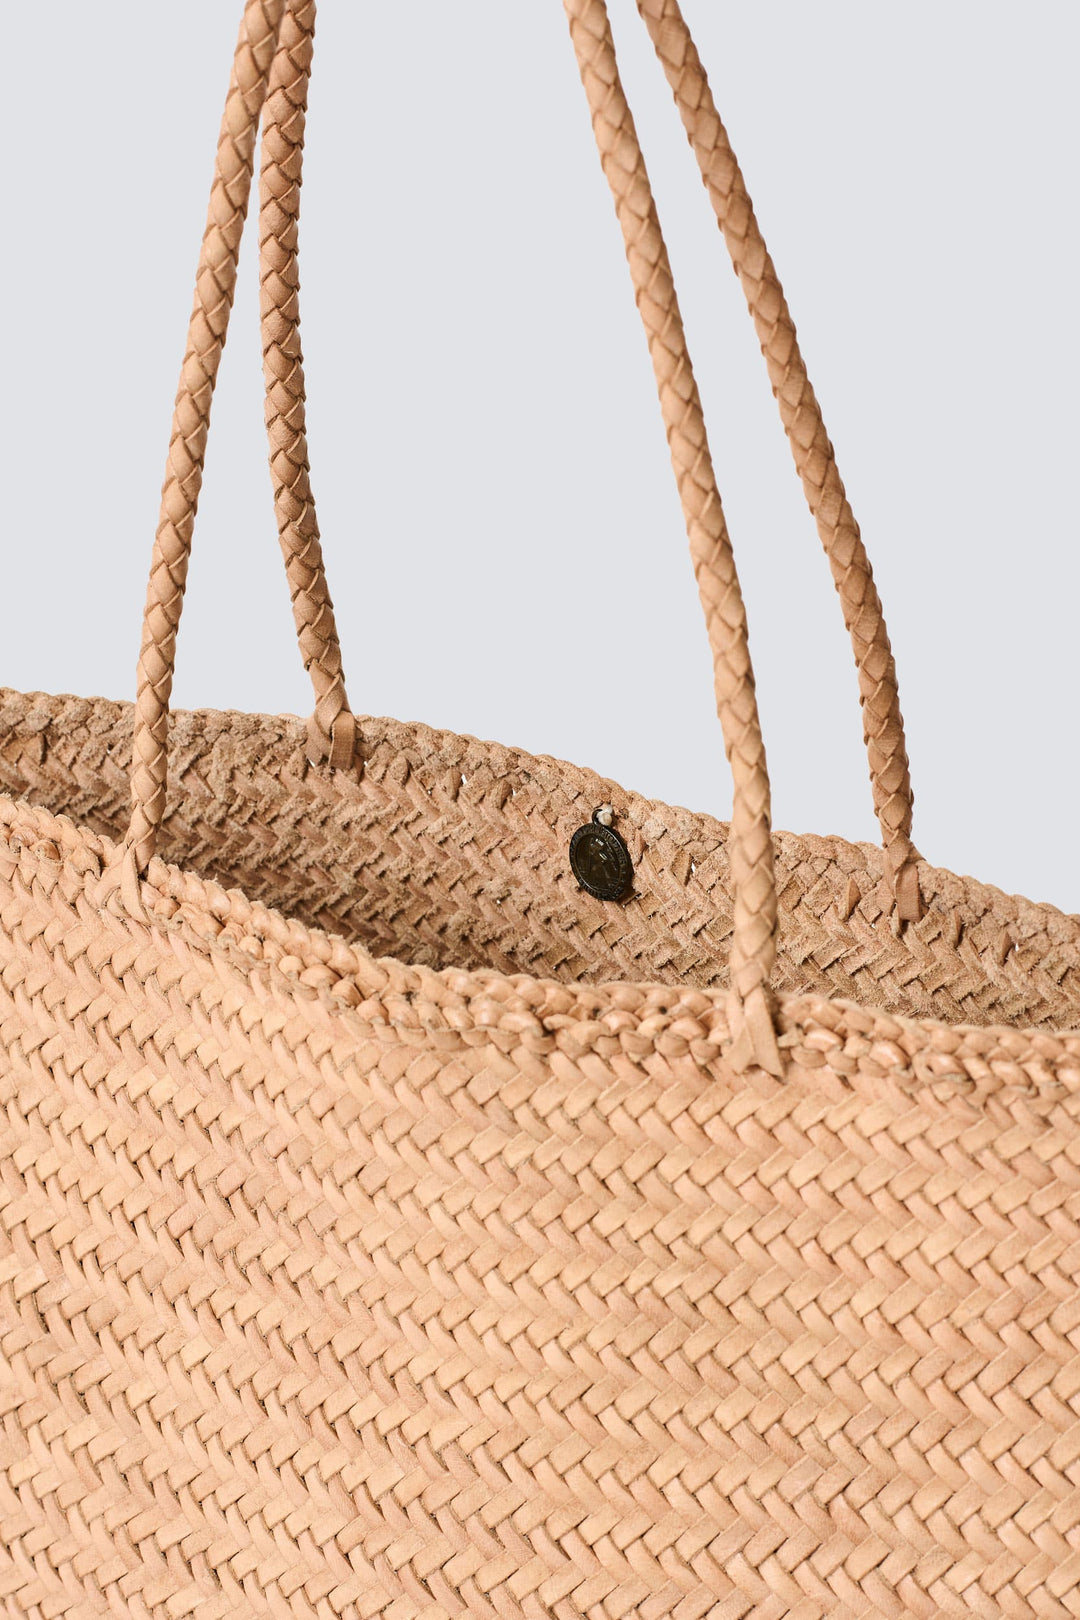 Dragon Diffusion woven leather bag handmade - Sophie Large Natural